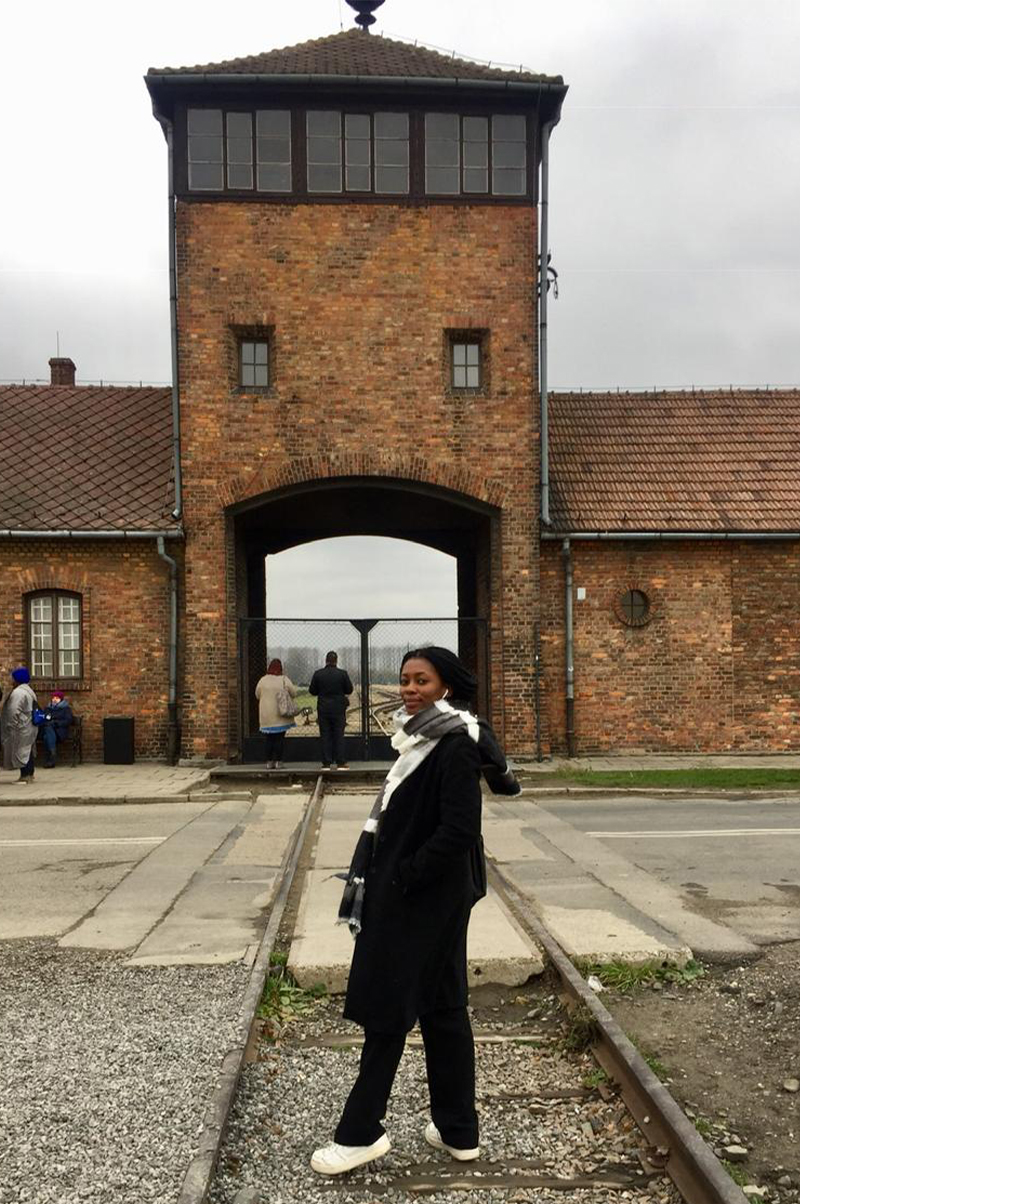 Tsegophatso Puto pictured in front of the infamous gate of Auschwitz-Birkenau.